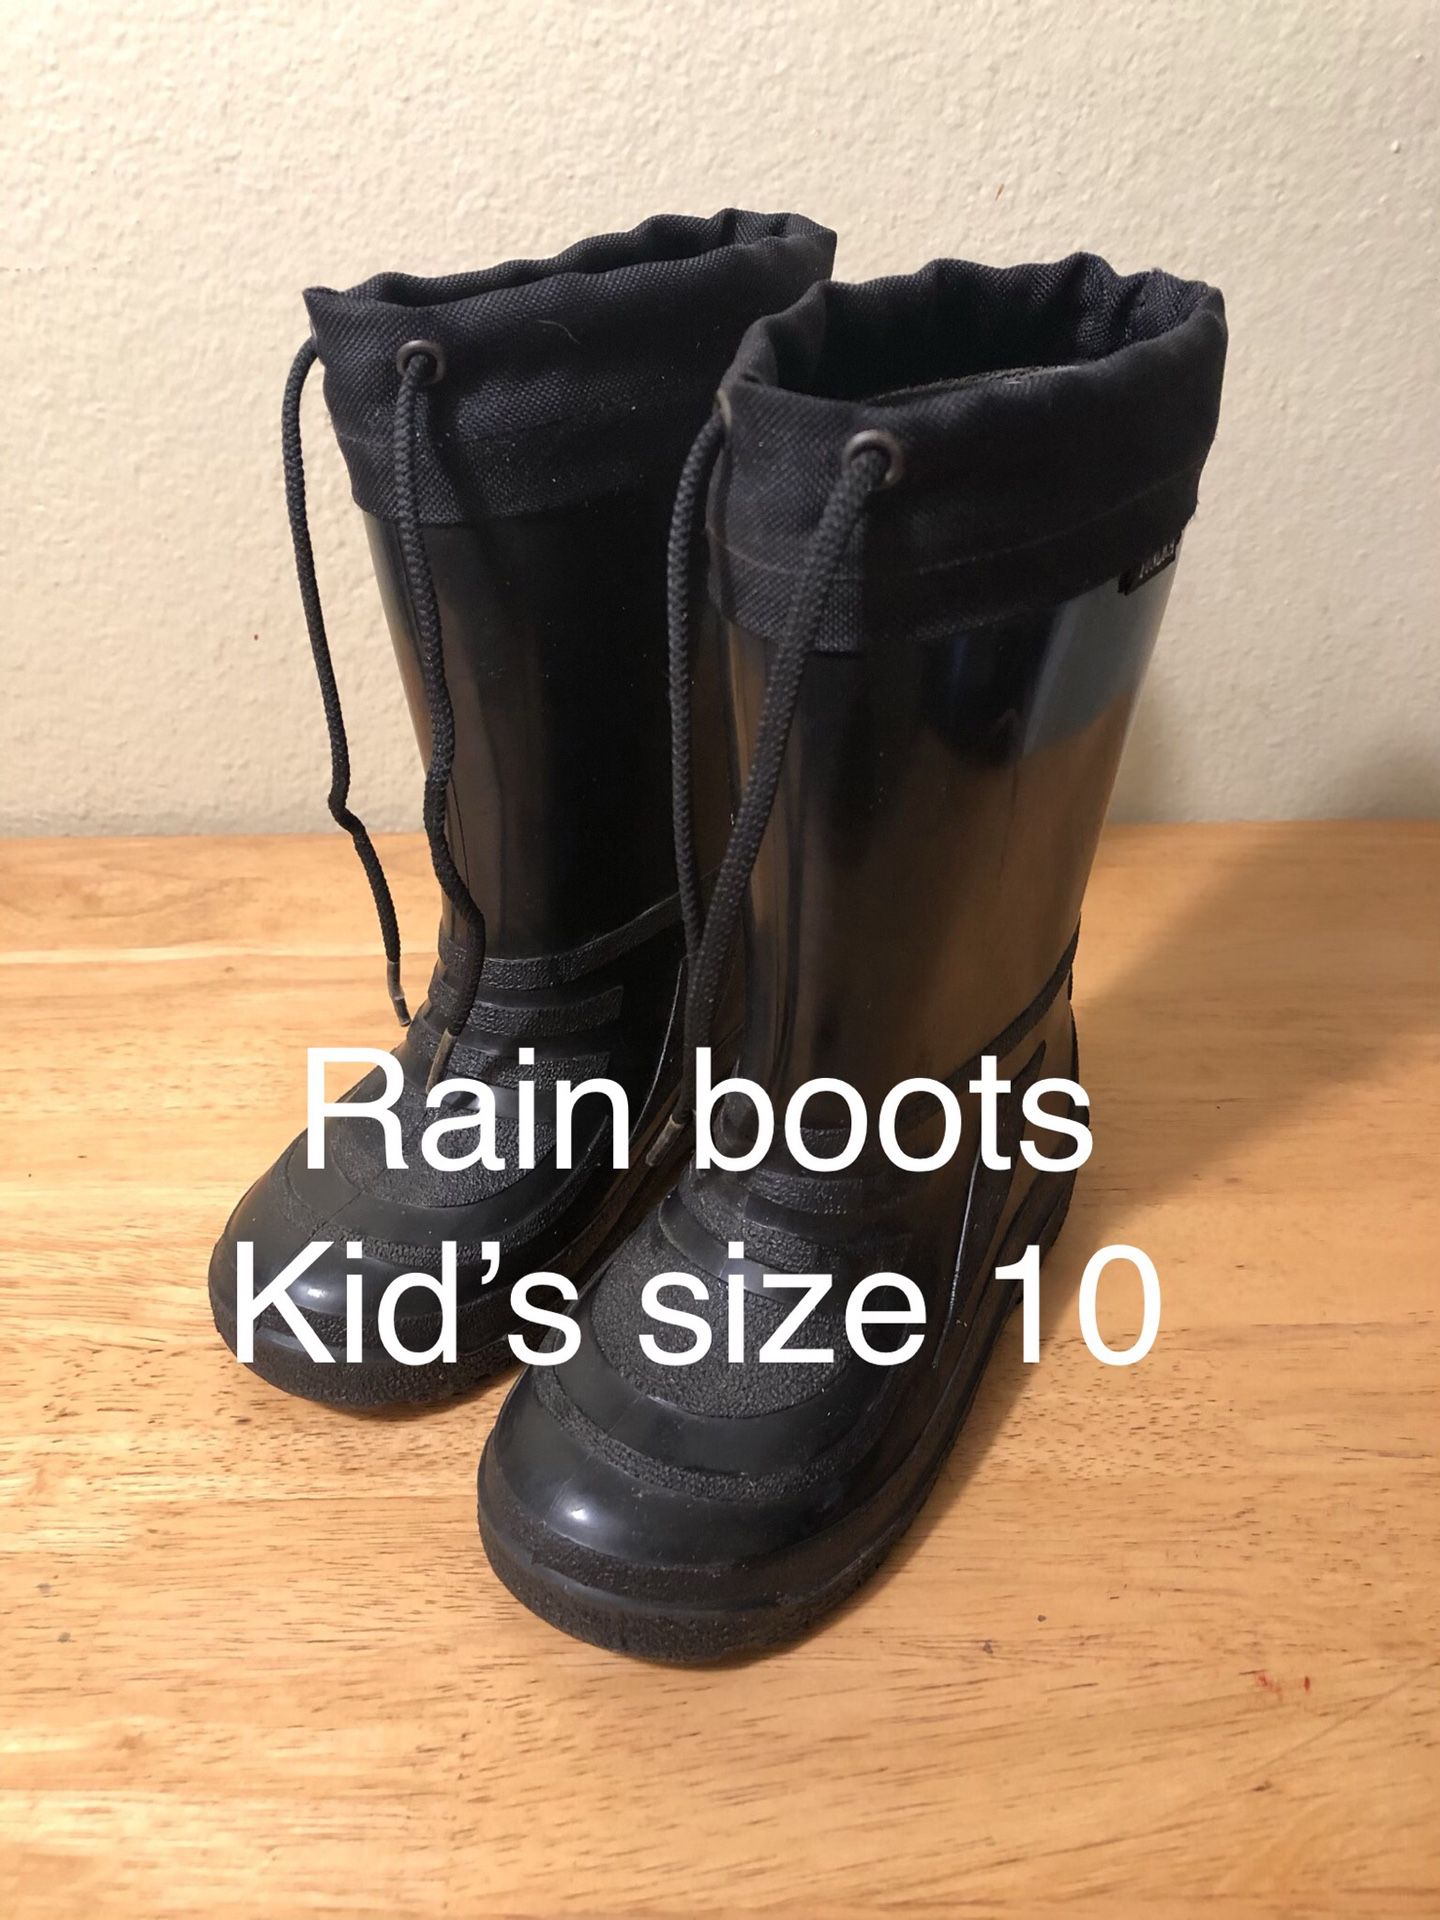 Kids insulted rain/snow boots